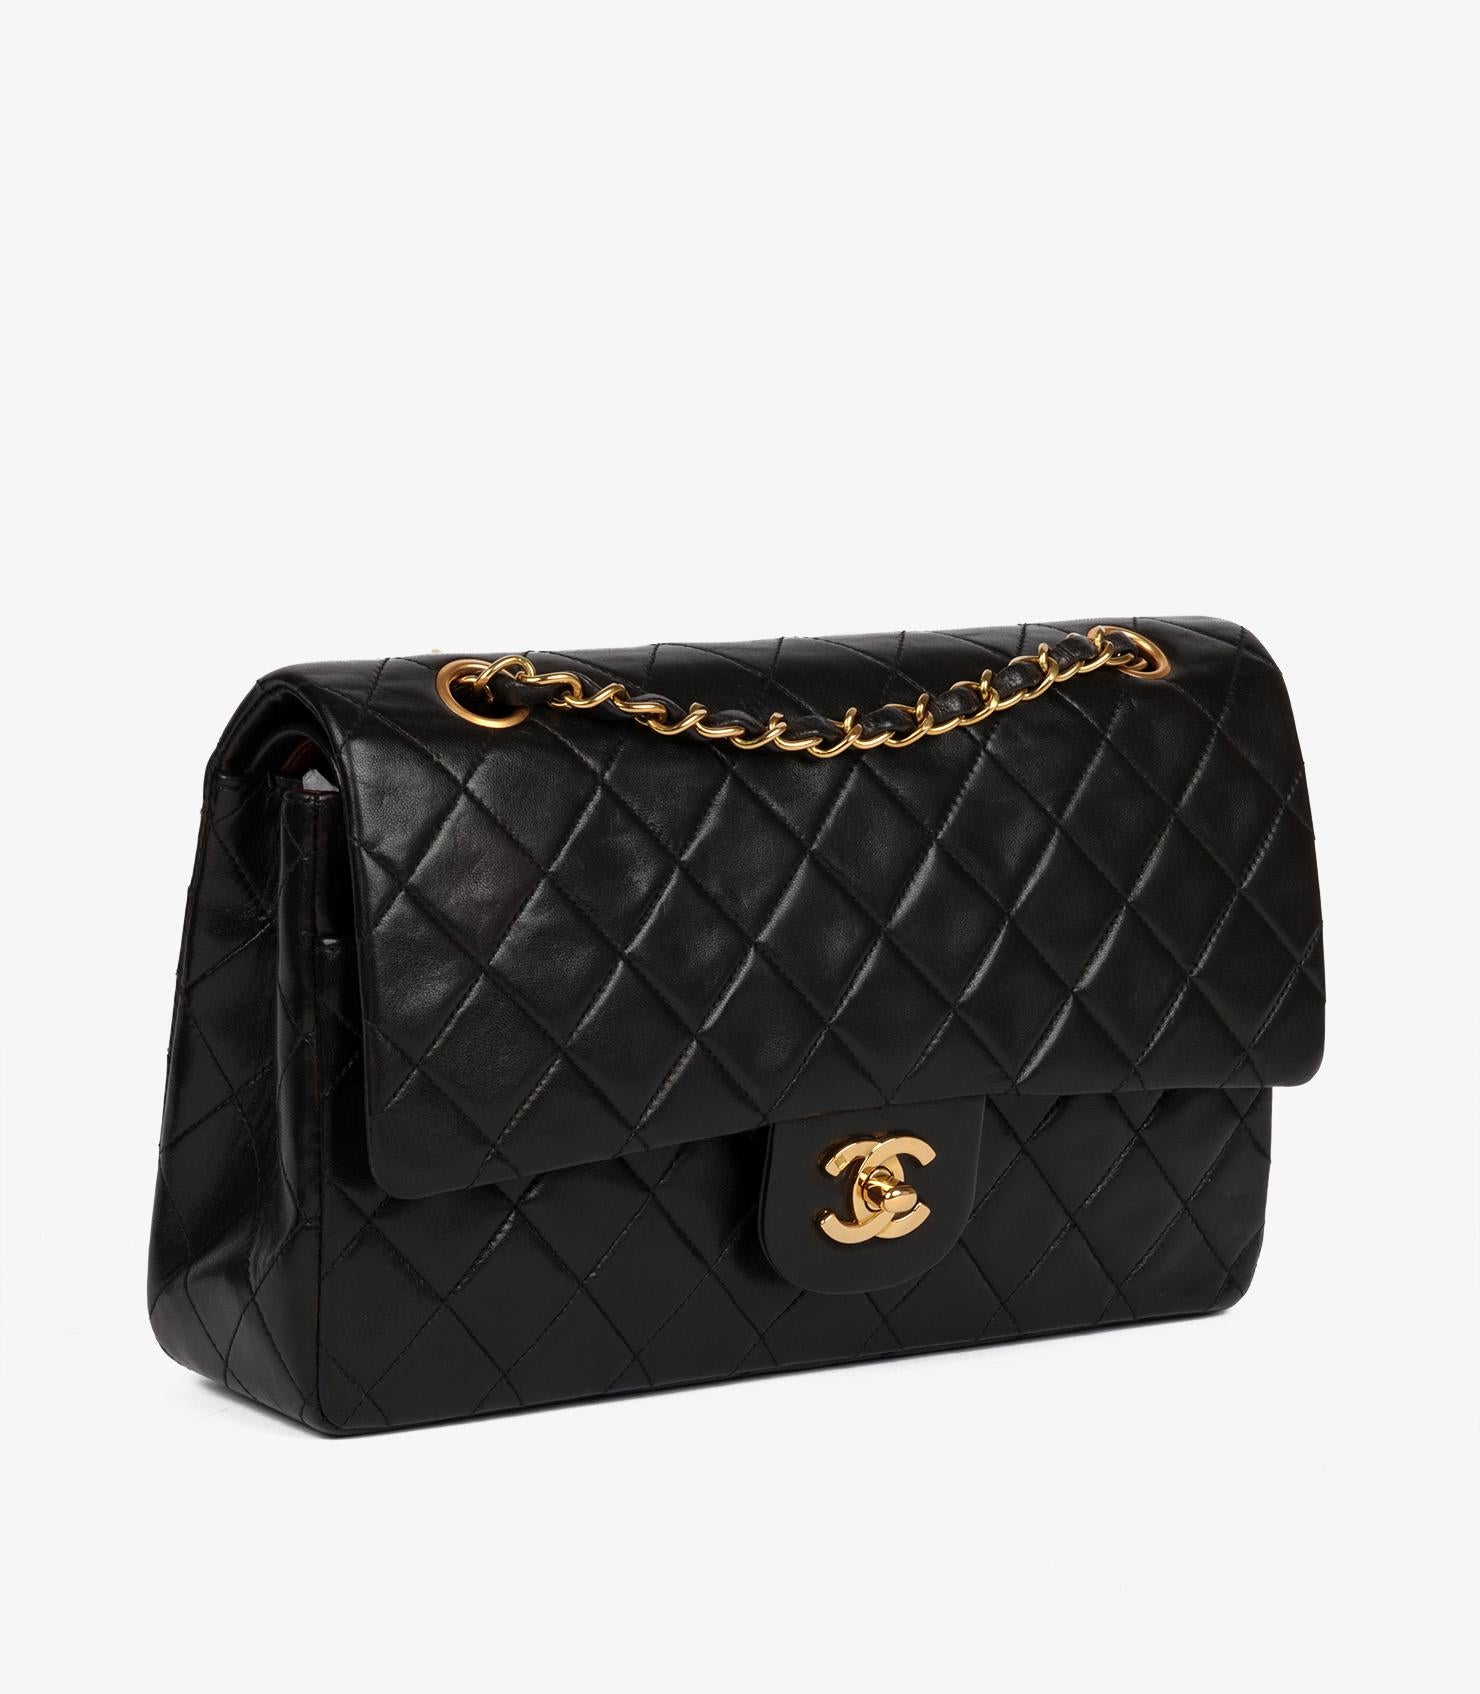 Chanel Black Quilted Lambskin Vintage Medium Classic Double Flap Bag

Brand- Chanel
Model- Medium Classic Double Flap Bag
Product Type- Shoulder
Serial Number- 30*****
Age- Circa 1994
Accompanied By- Chanel Dust Bag, Authenticity Card
Colour-